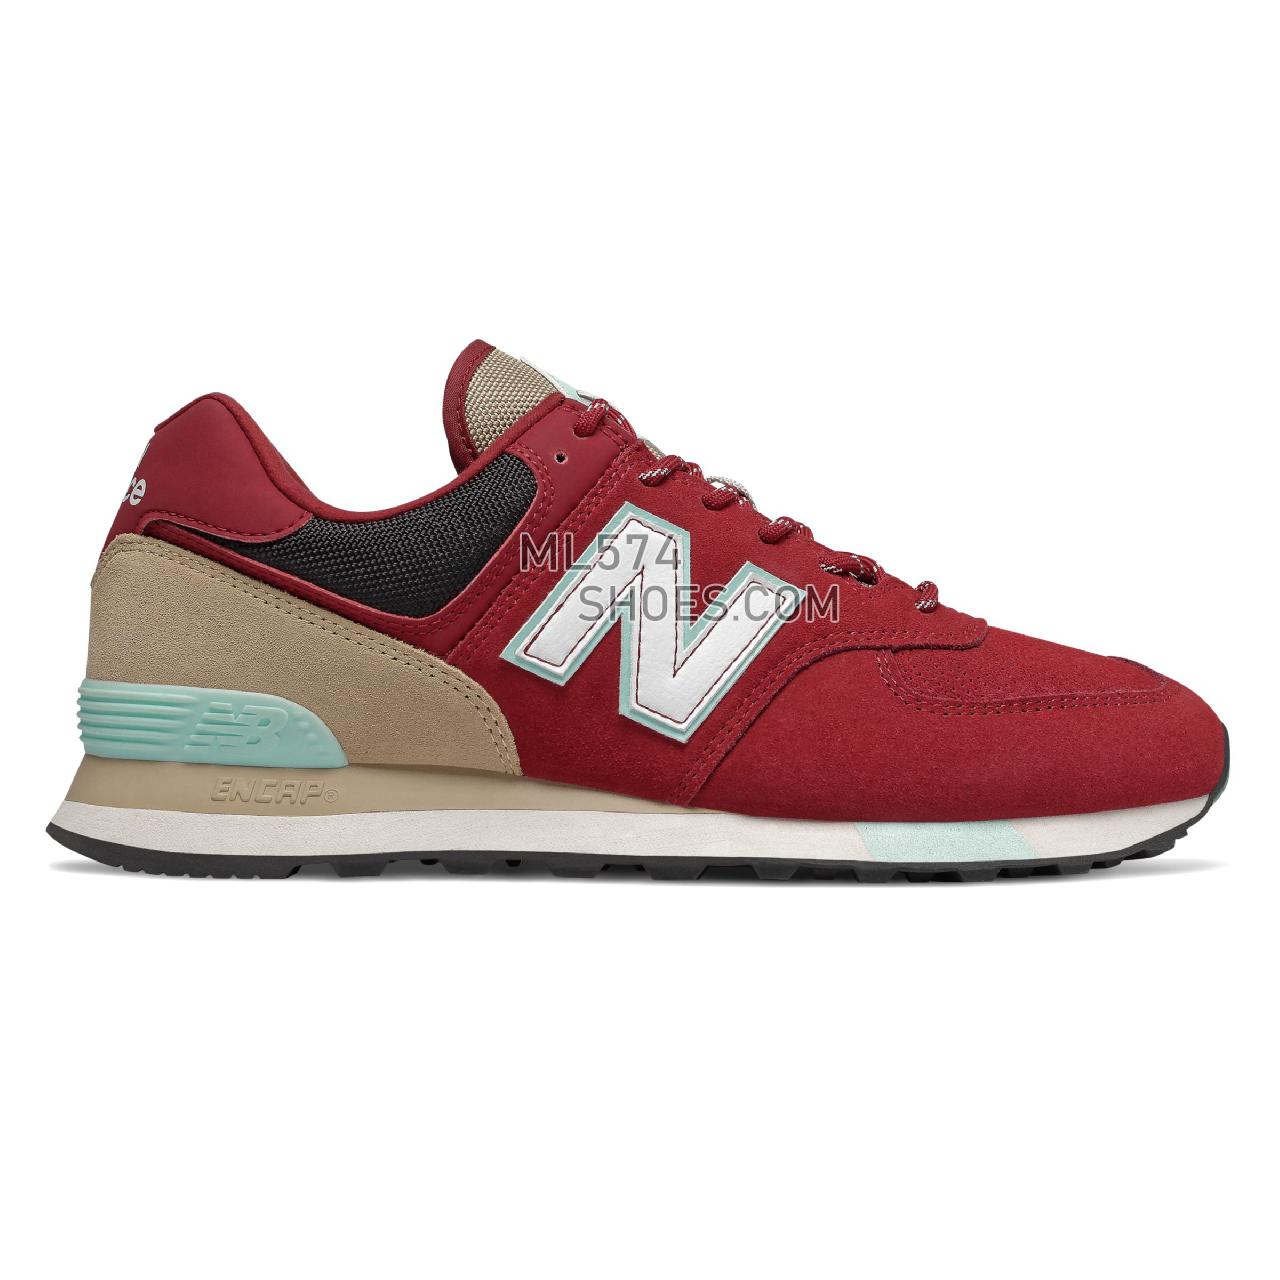 New Balance 574 - Men's Classic Sneakers - Team Red with Light Reef - ML574JHQ